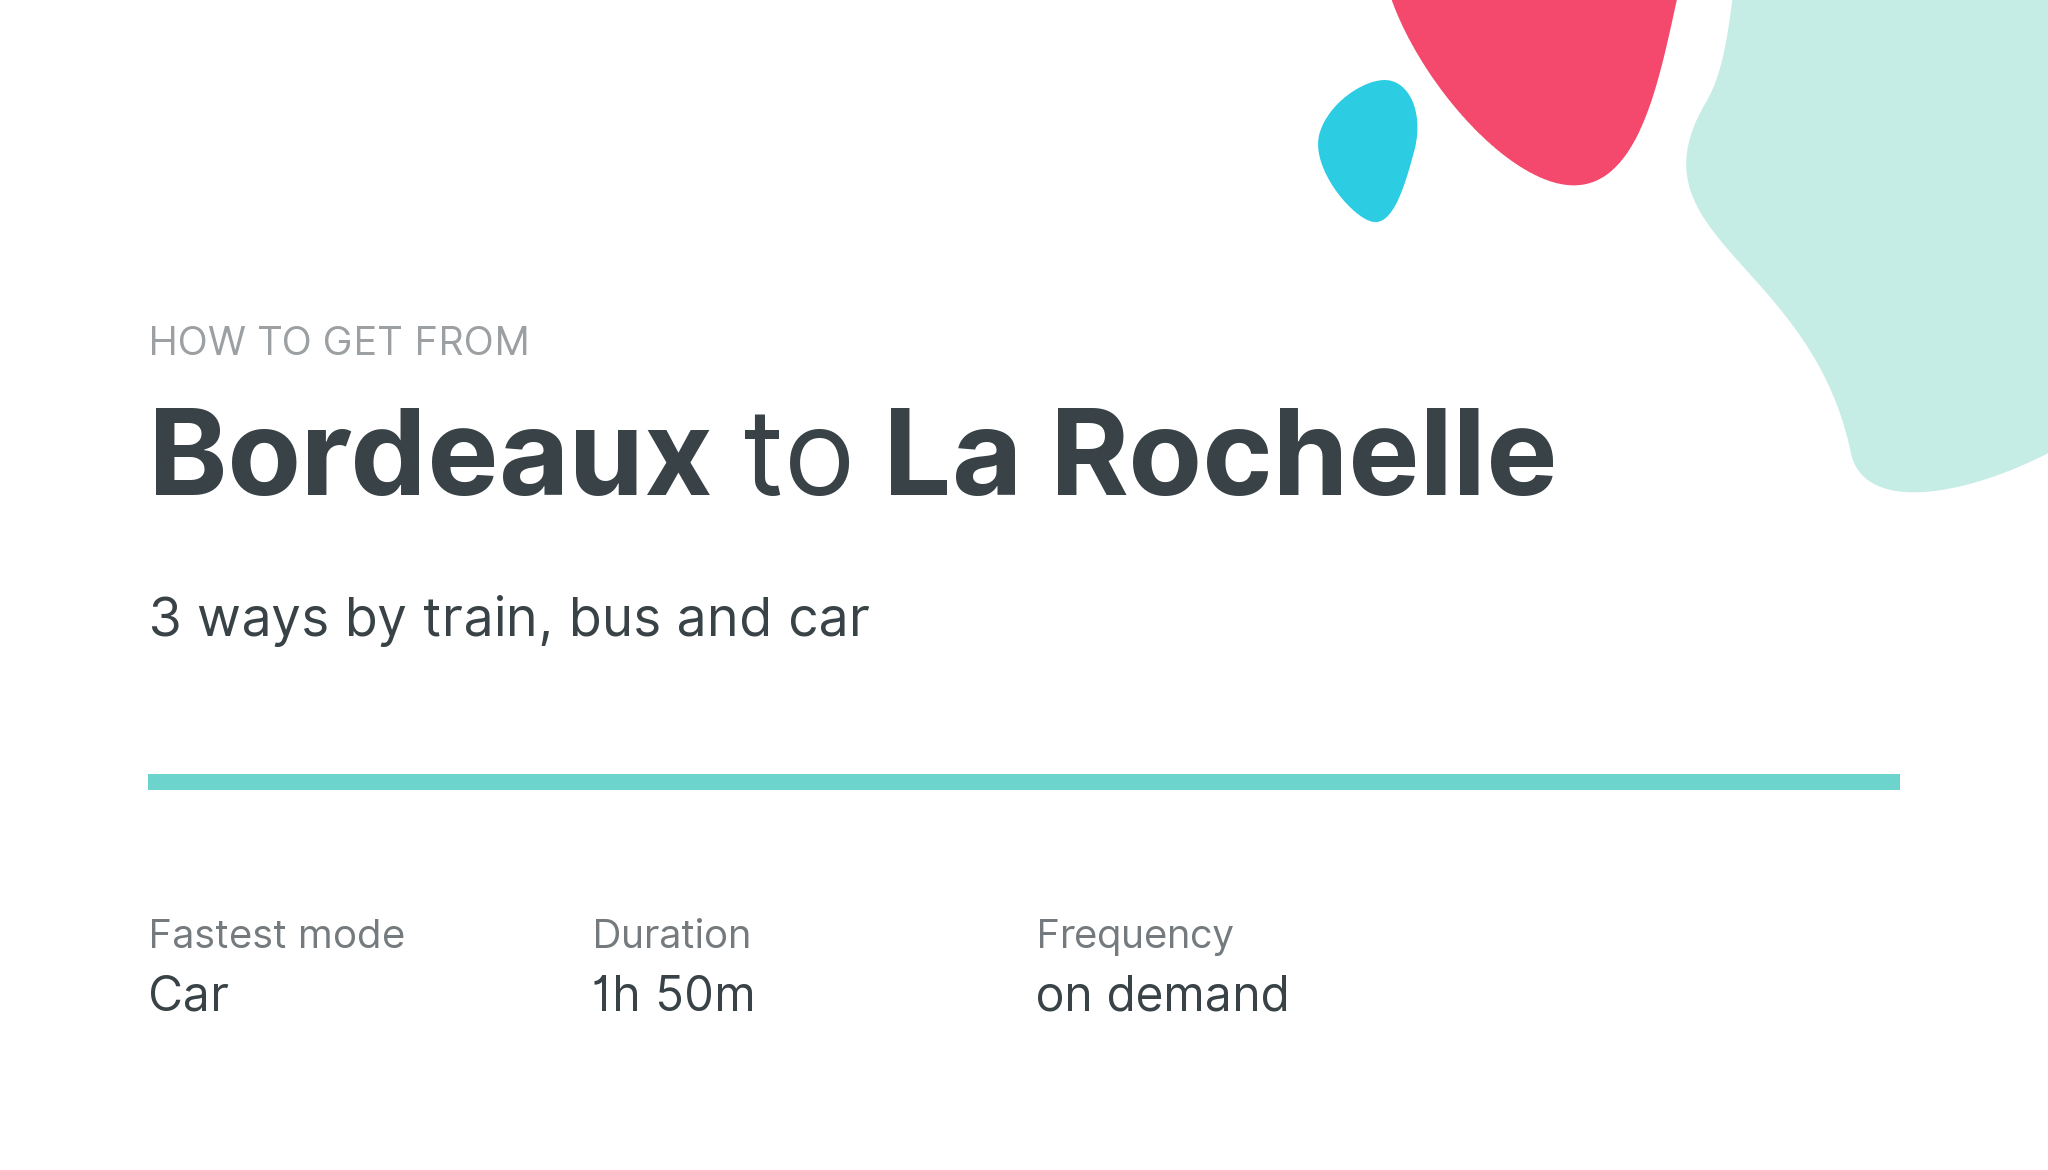 How do I get from Bordeaux to La Rochelle